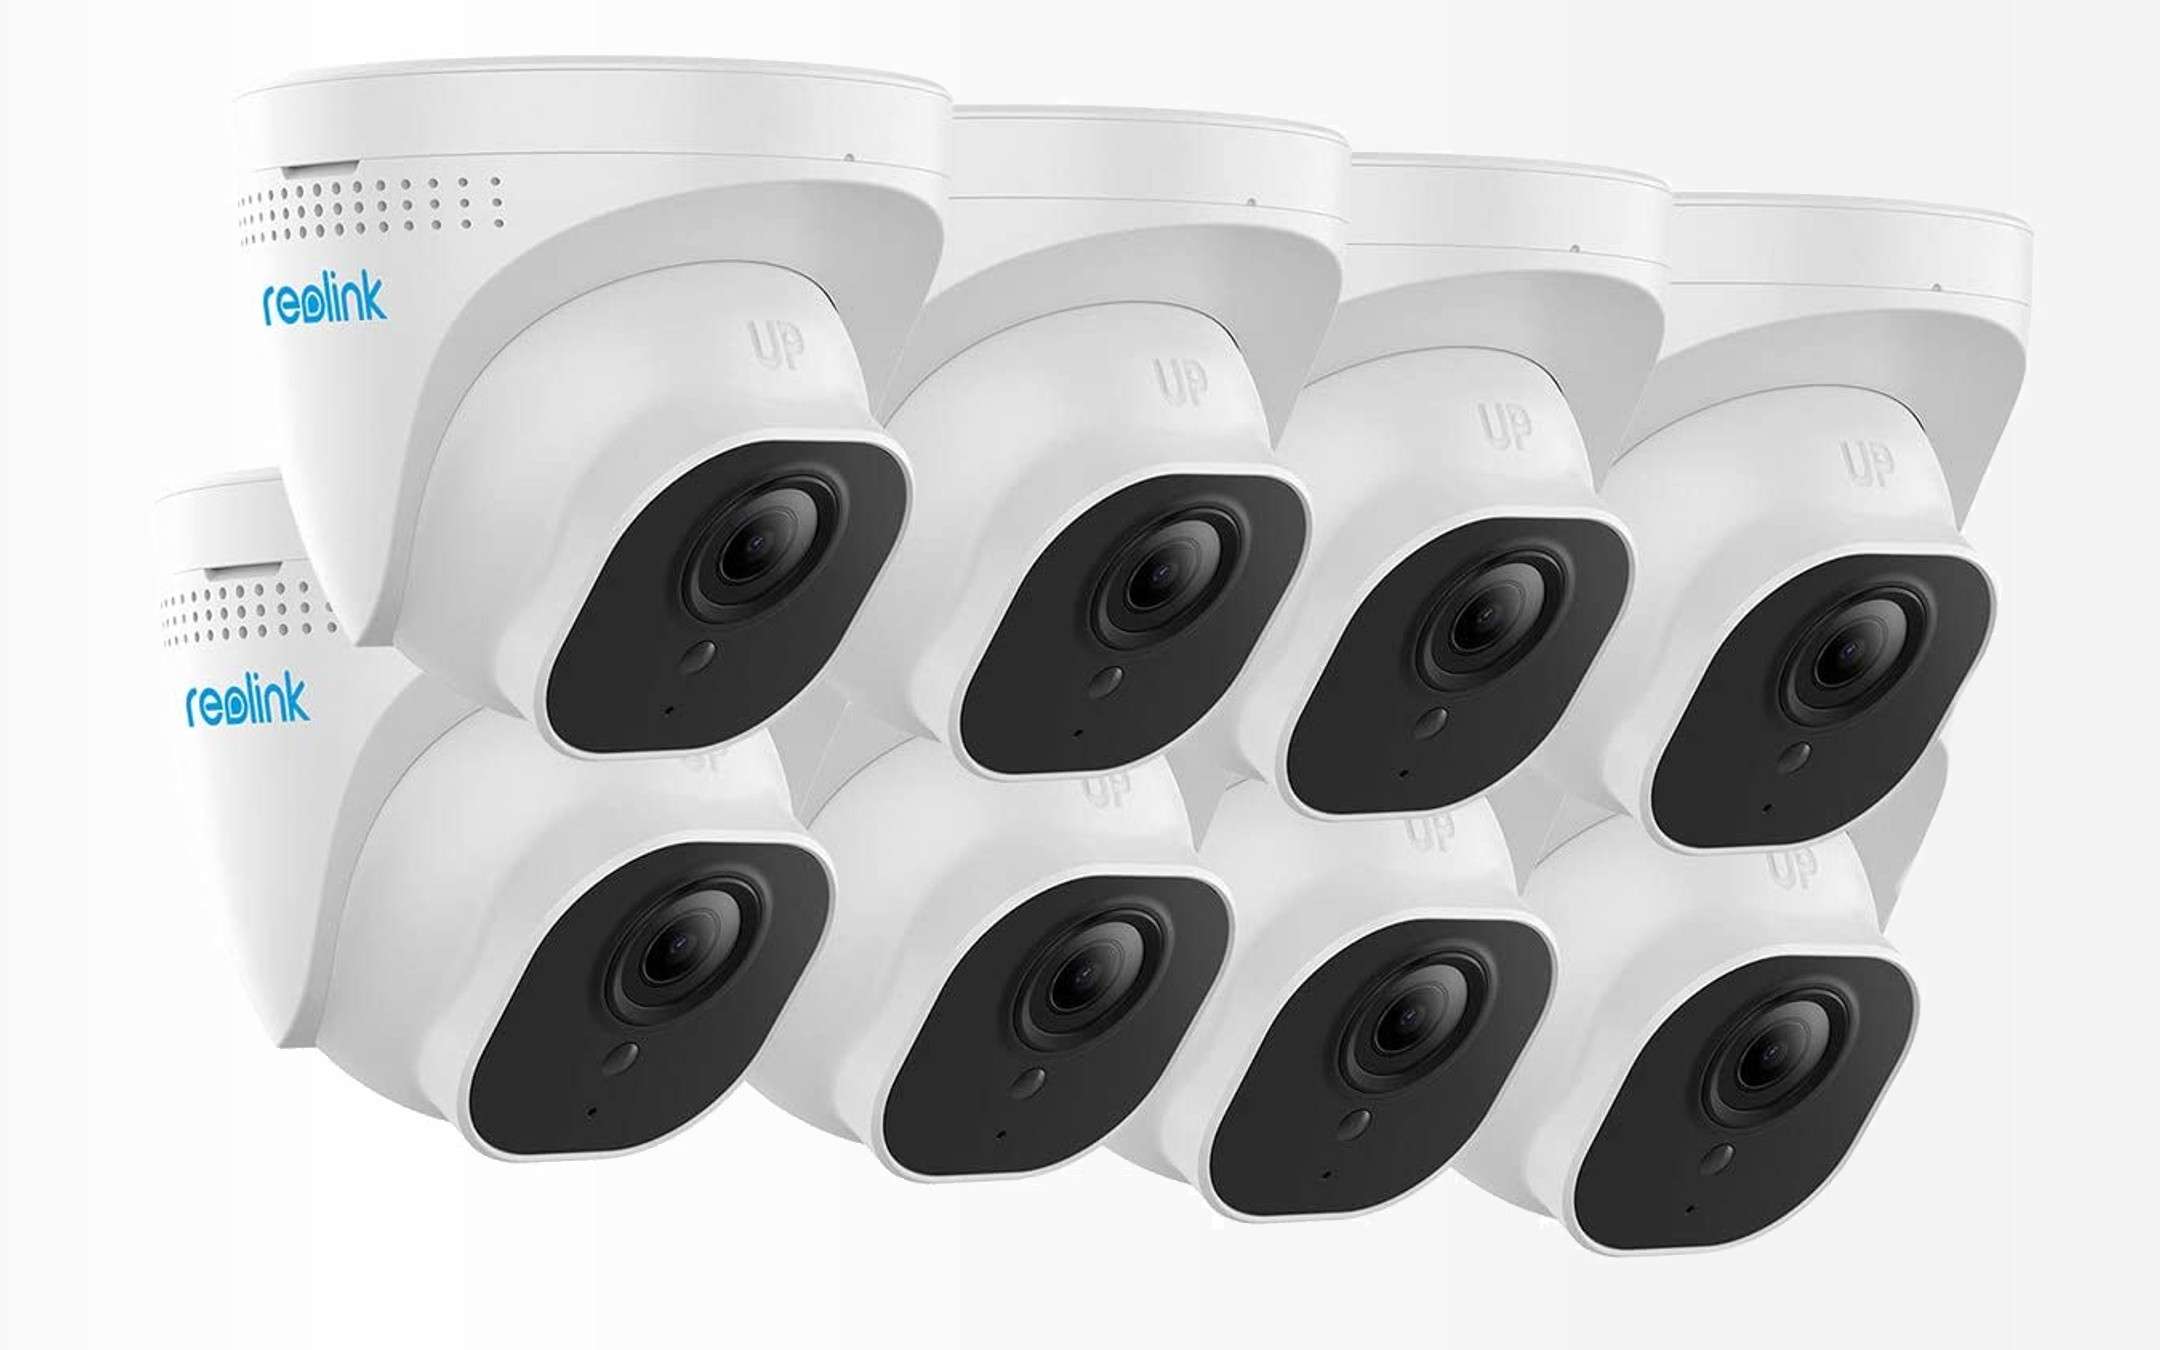 4K video surveillance at a price never seen before